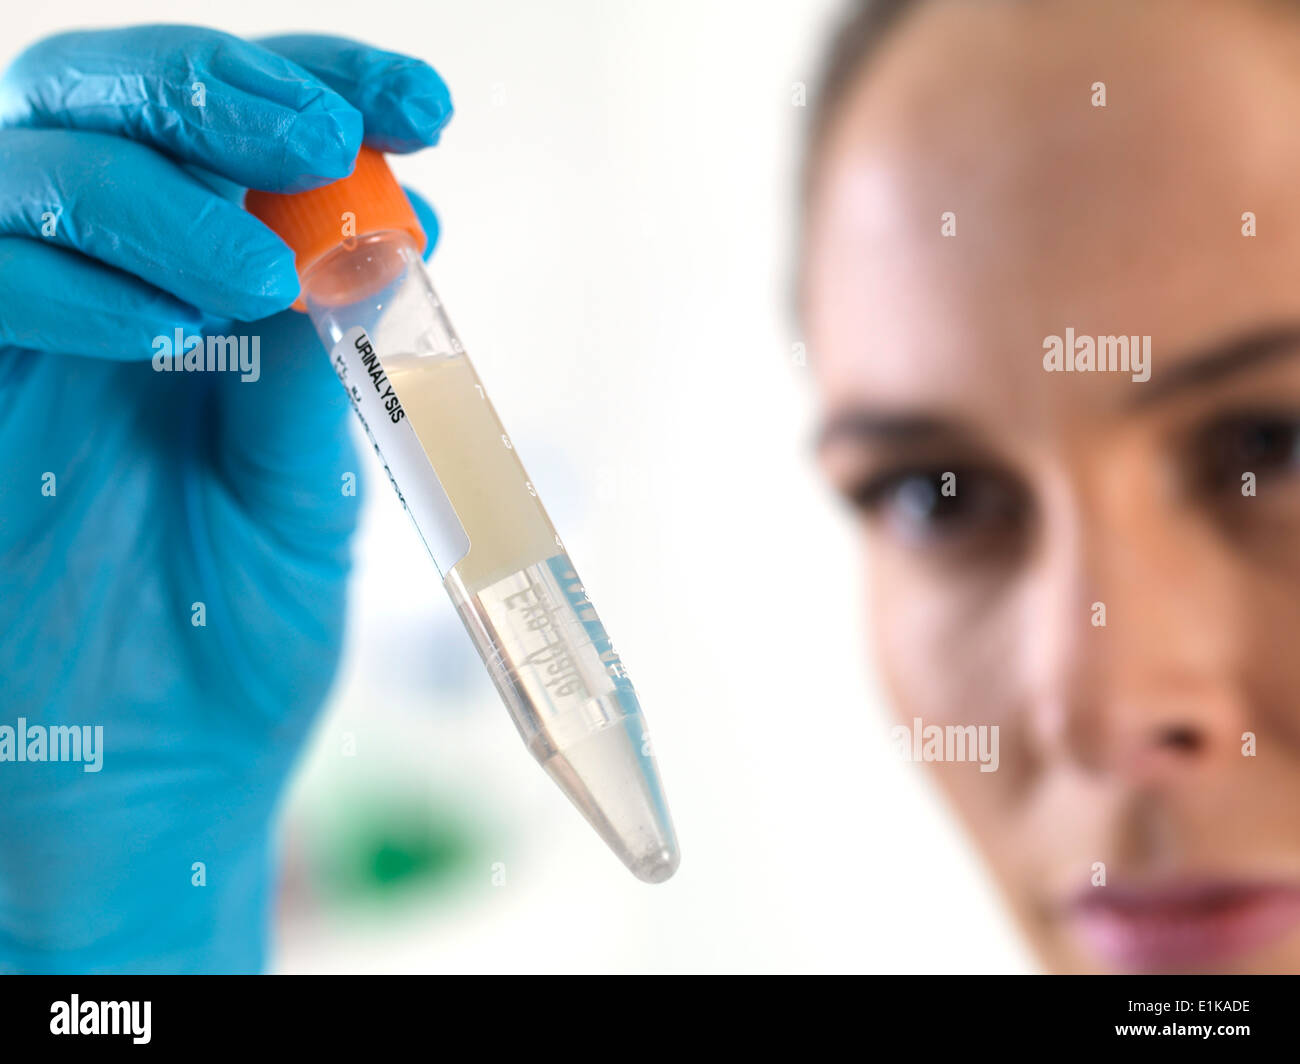 Female scientist holding an eppendorf tube with liquid inside. Stock Photo